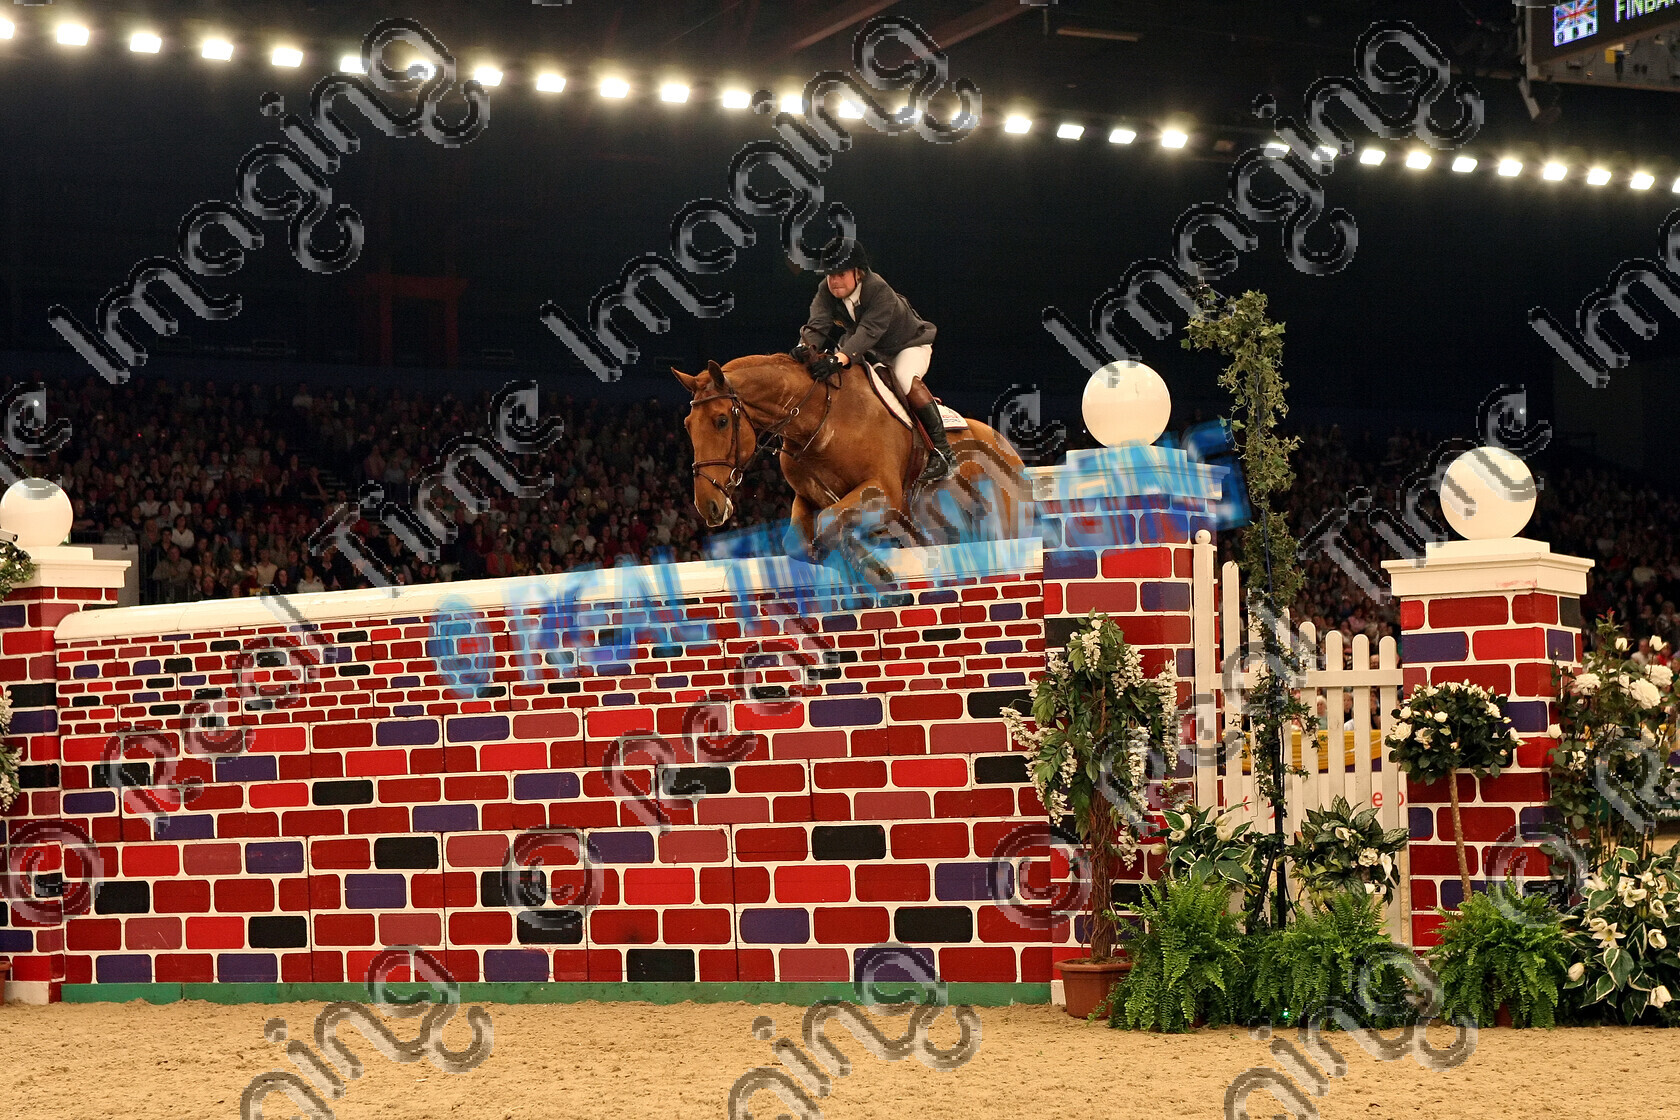 S08-58-10-196 
 Keywords: The Horse Of The Year Show, HOYS, NEC Arena, Birmingham, UK, Saturday, 11, October, 2008, view landscape, indoors, The Puissance, 1st first, winner win won, 67, FINBARR V, `Owner: , Hall, Mandy, `Rider: , Robert Whitaker, chestnut, Gelding, showjump, jump, wall, 7 feet 3 inches 2.1m